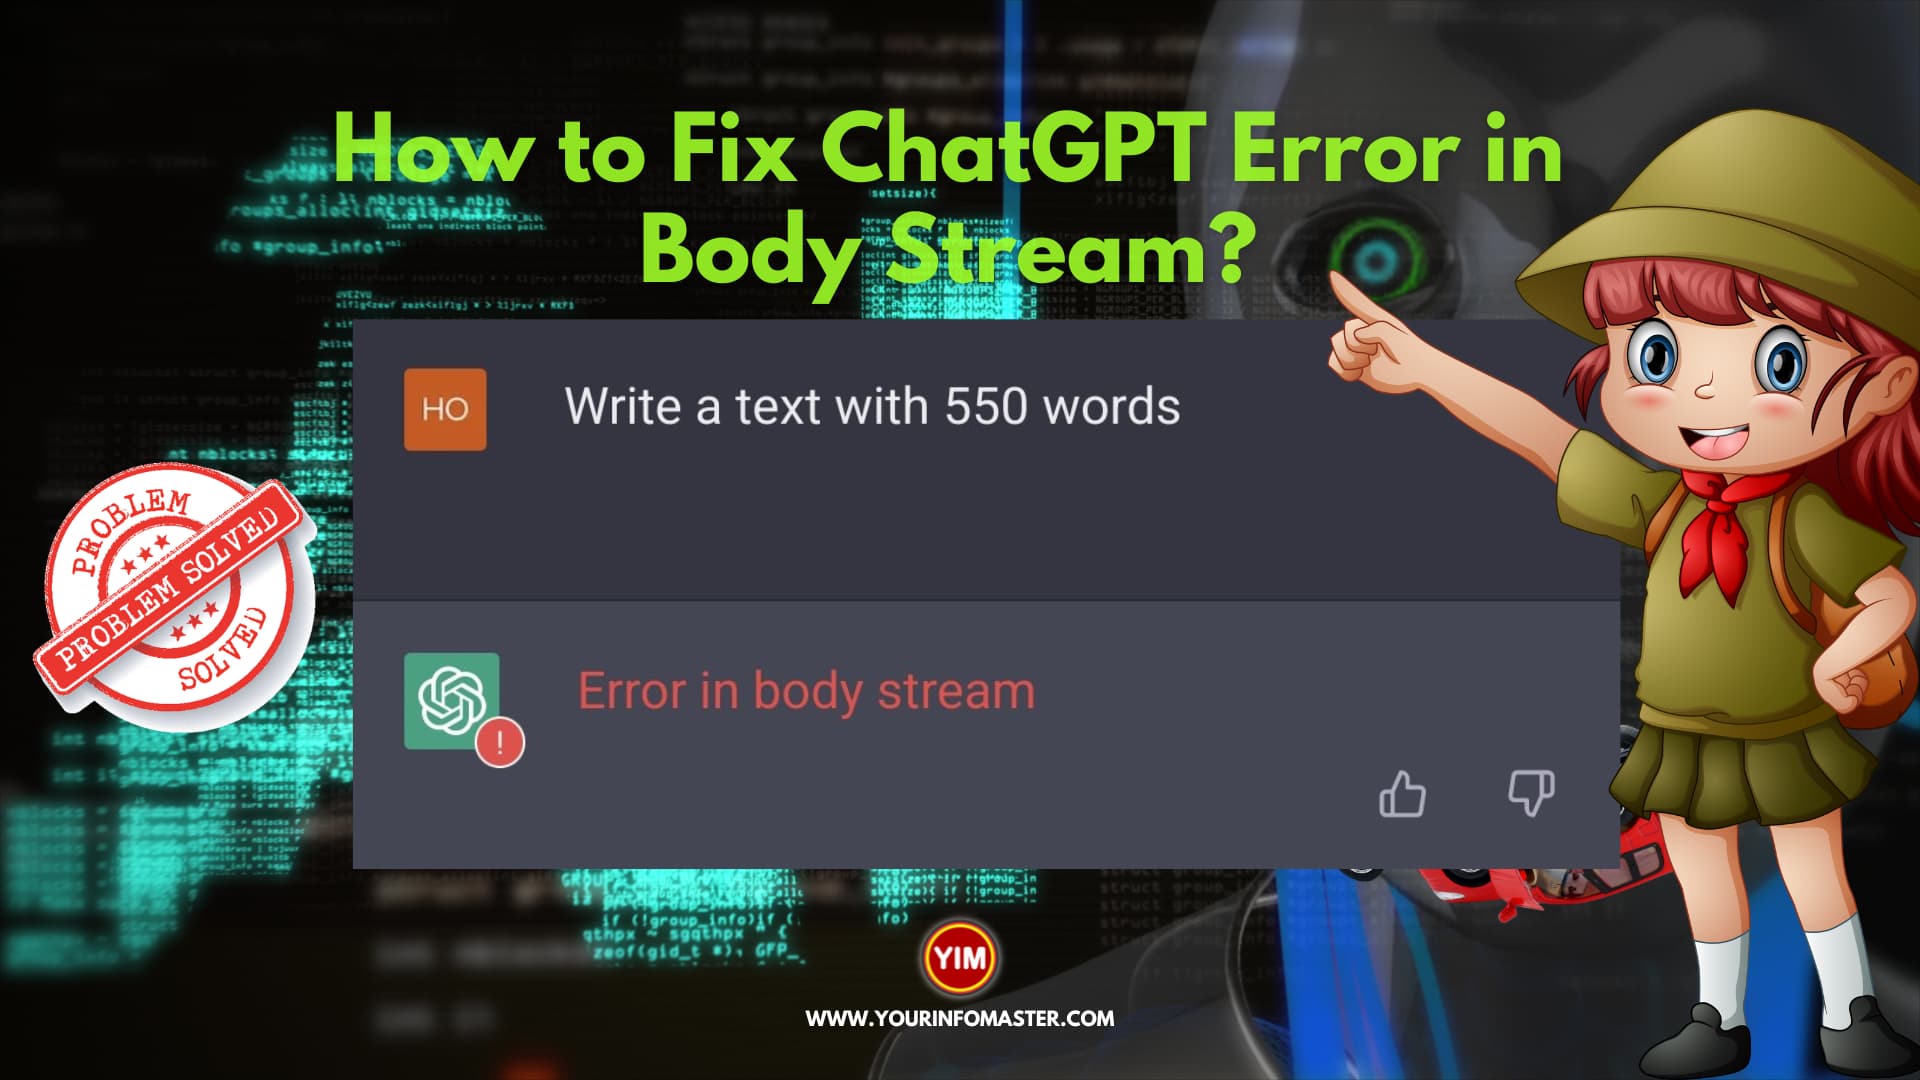 How to Fix ChatGPT Error in Body Stream